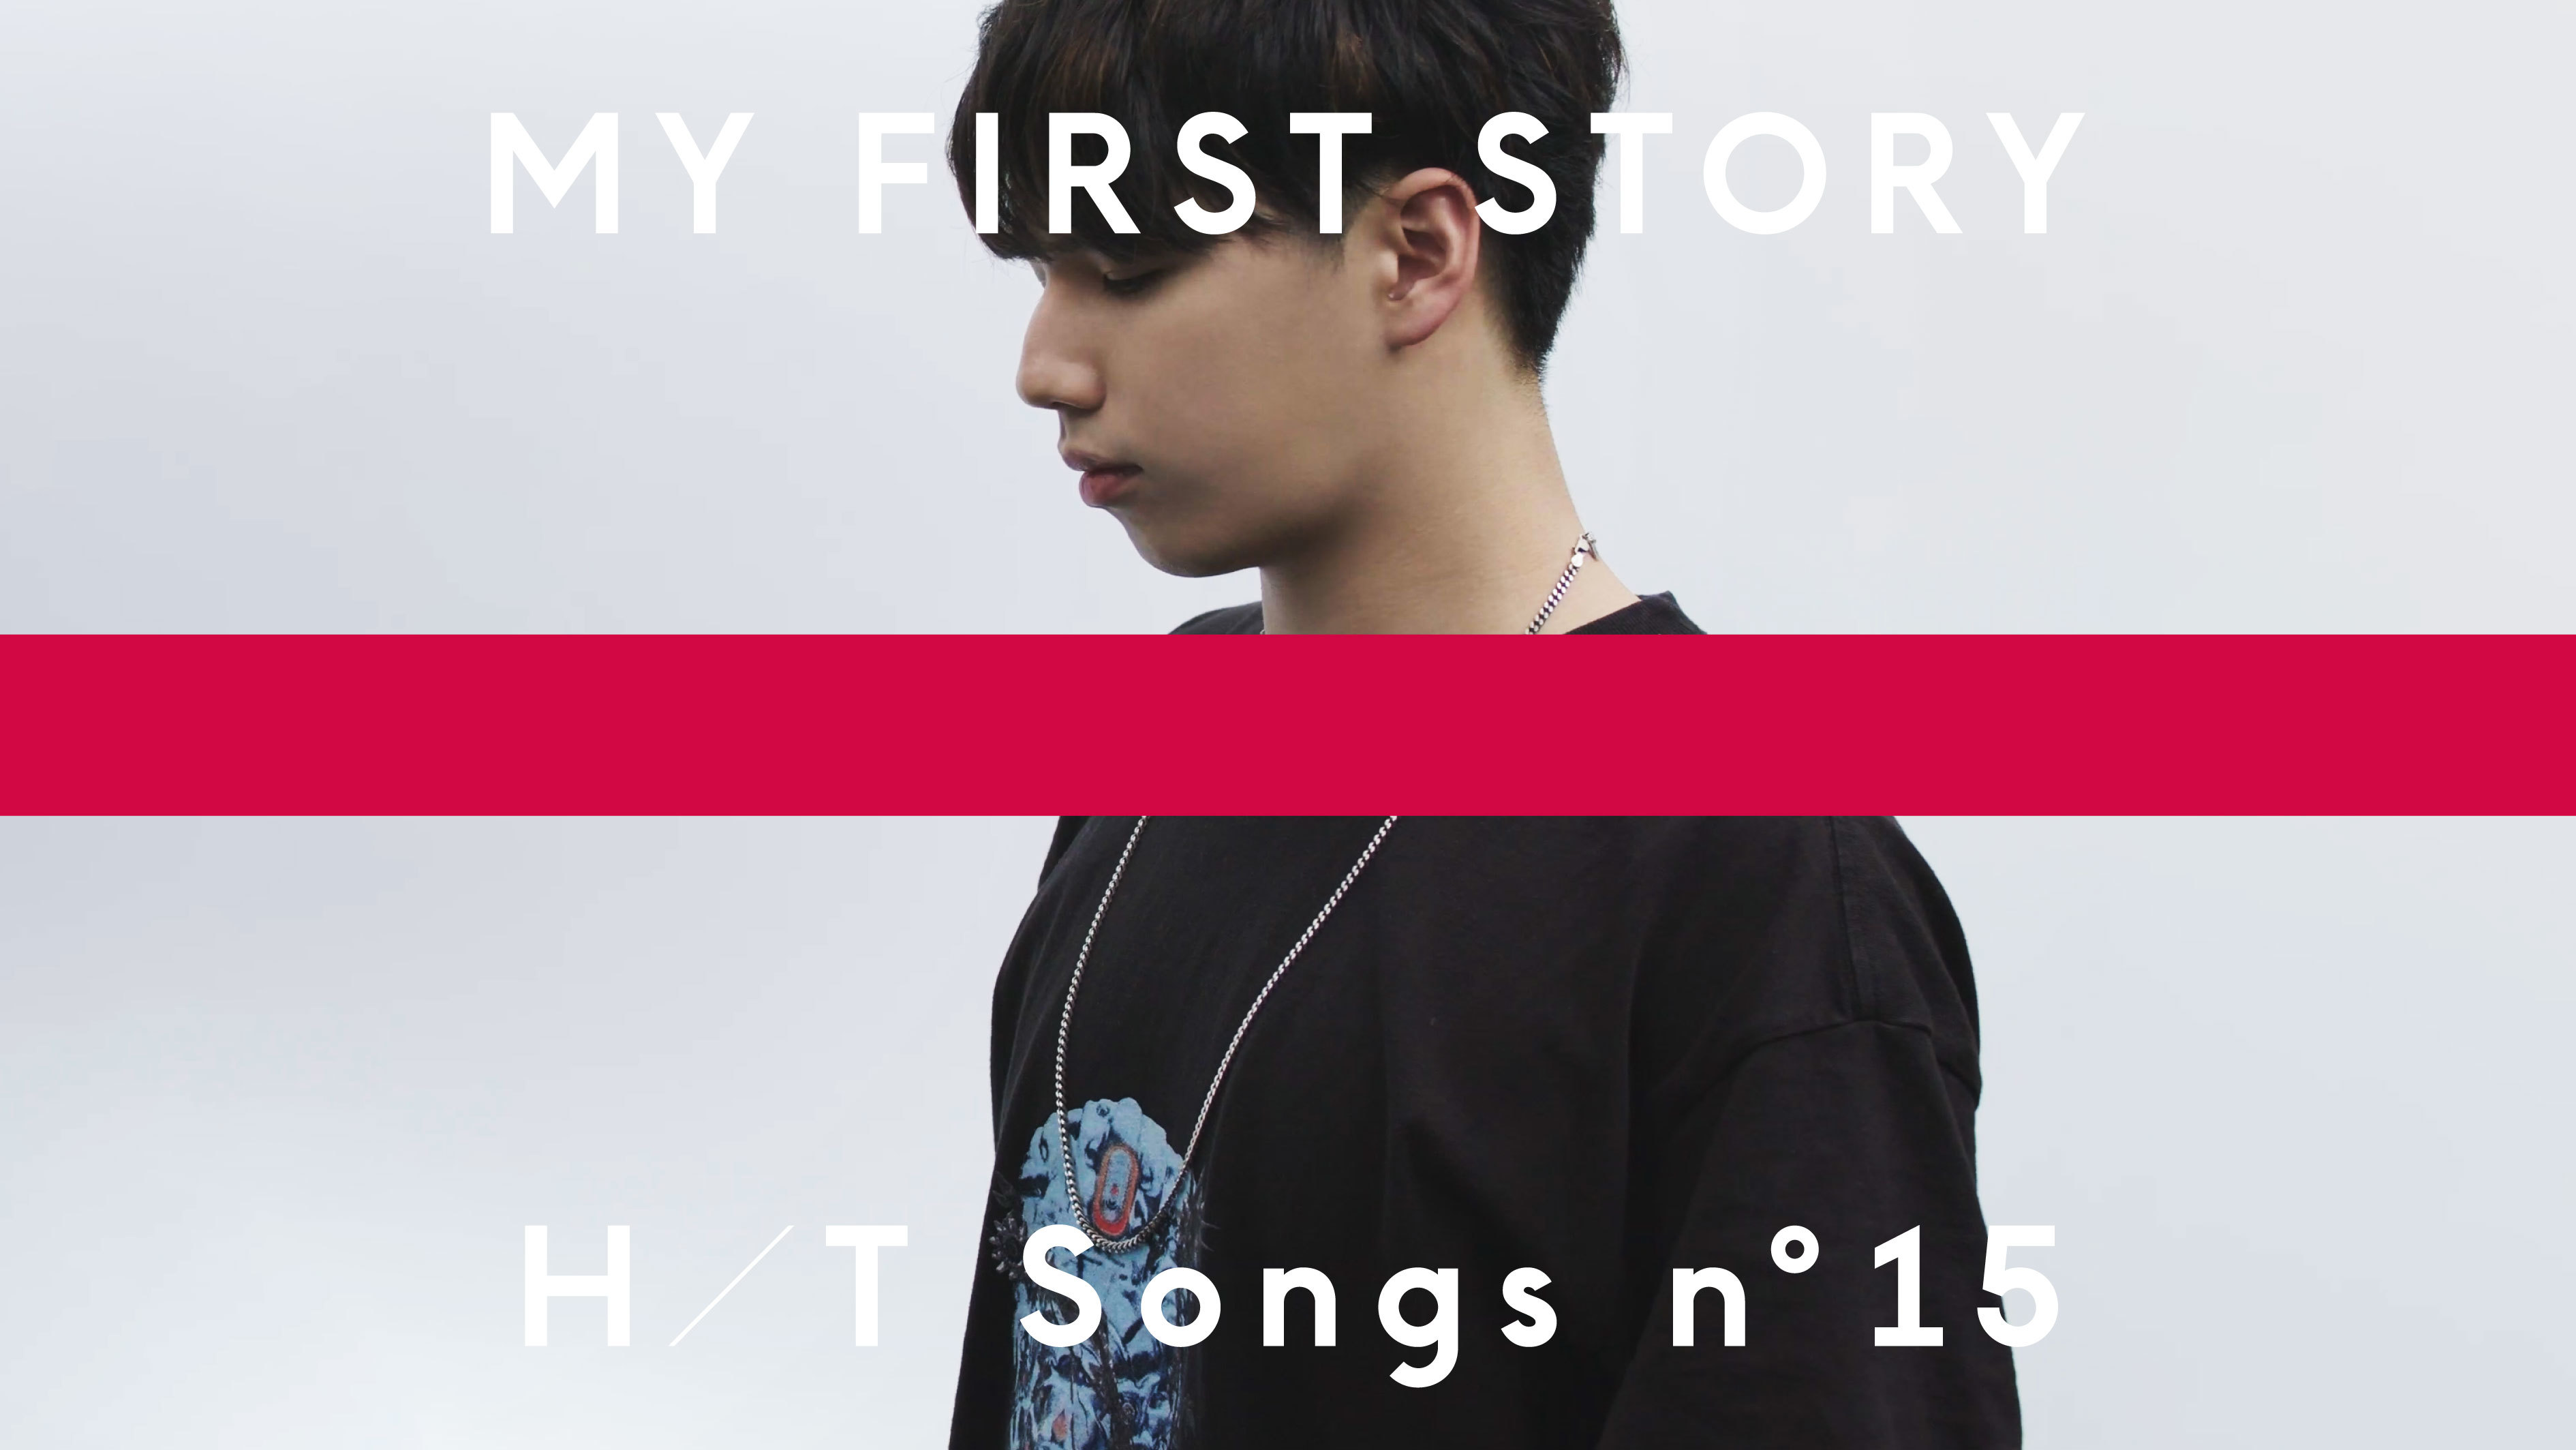 My First Story Youtubeチャンネル The First Take の新コンテンツ The Home Take で新曲 ハイエナ を披露 Spice エンタメ特化型情報メディア スパイス